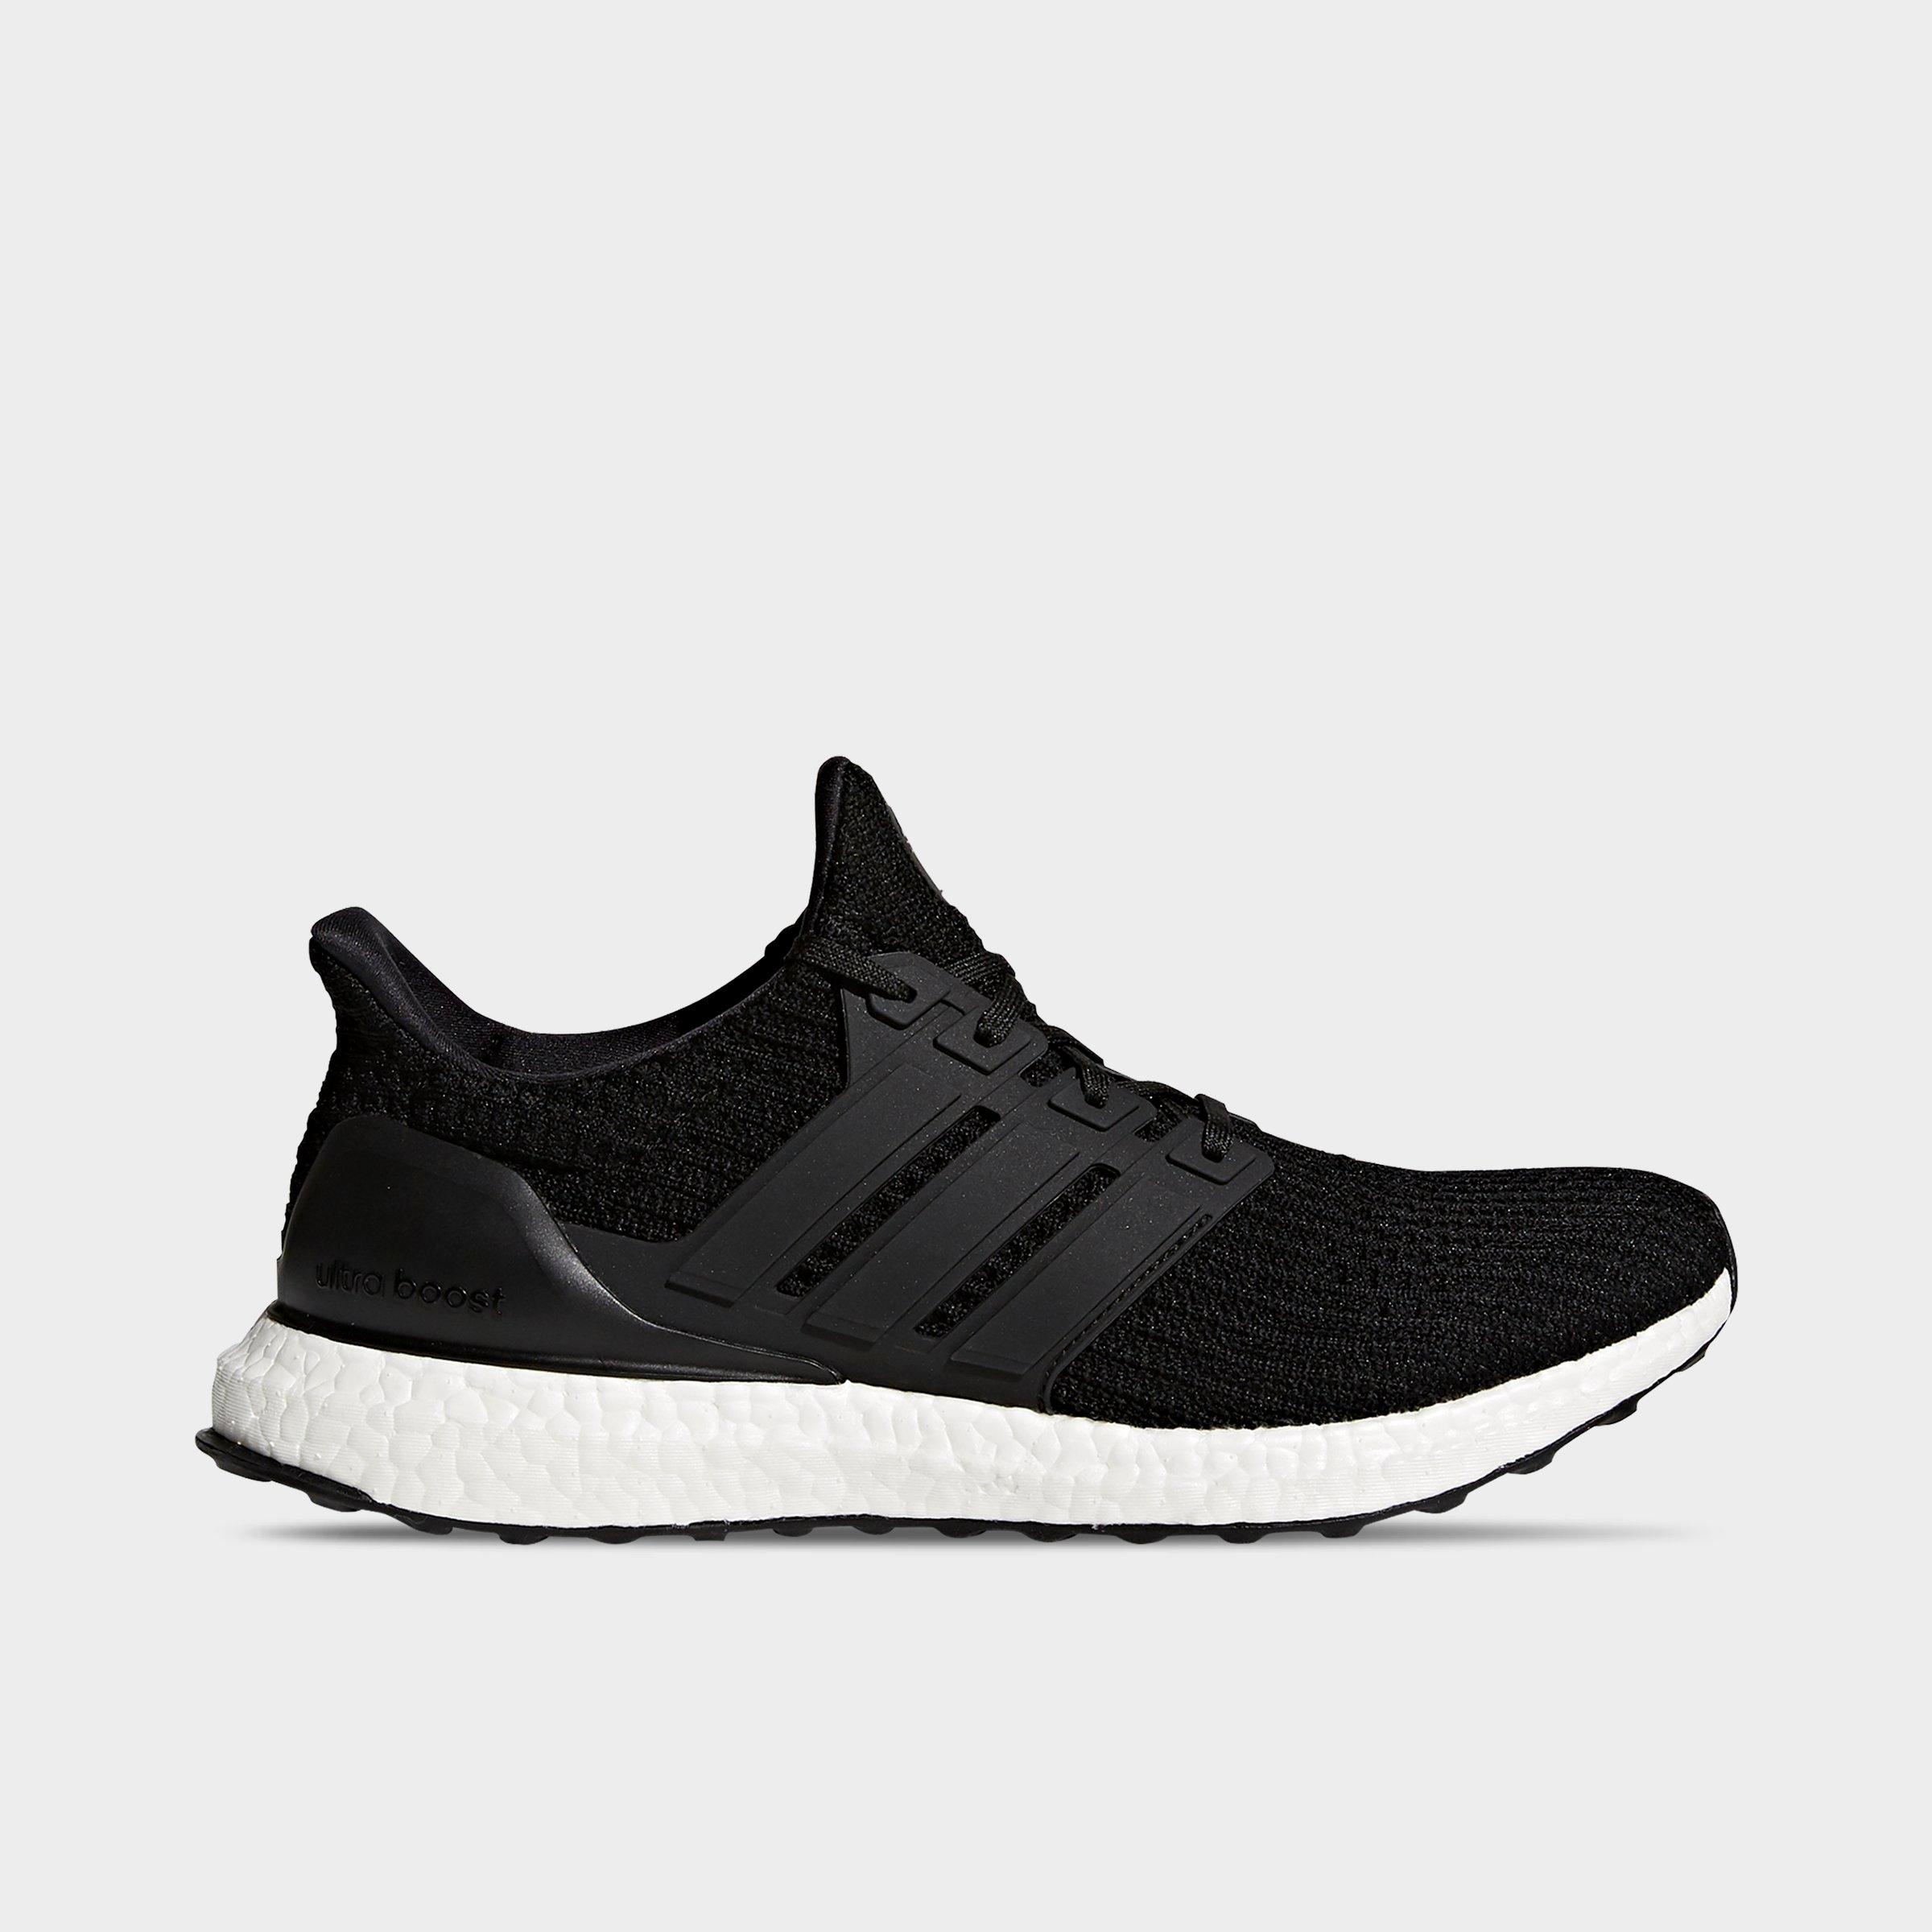 UPC 191028352957 product image for Adidas Men's UltraBOOST Running Shoes in Black/Core Black Size 10.0 Knit | upcitemdb.com